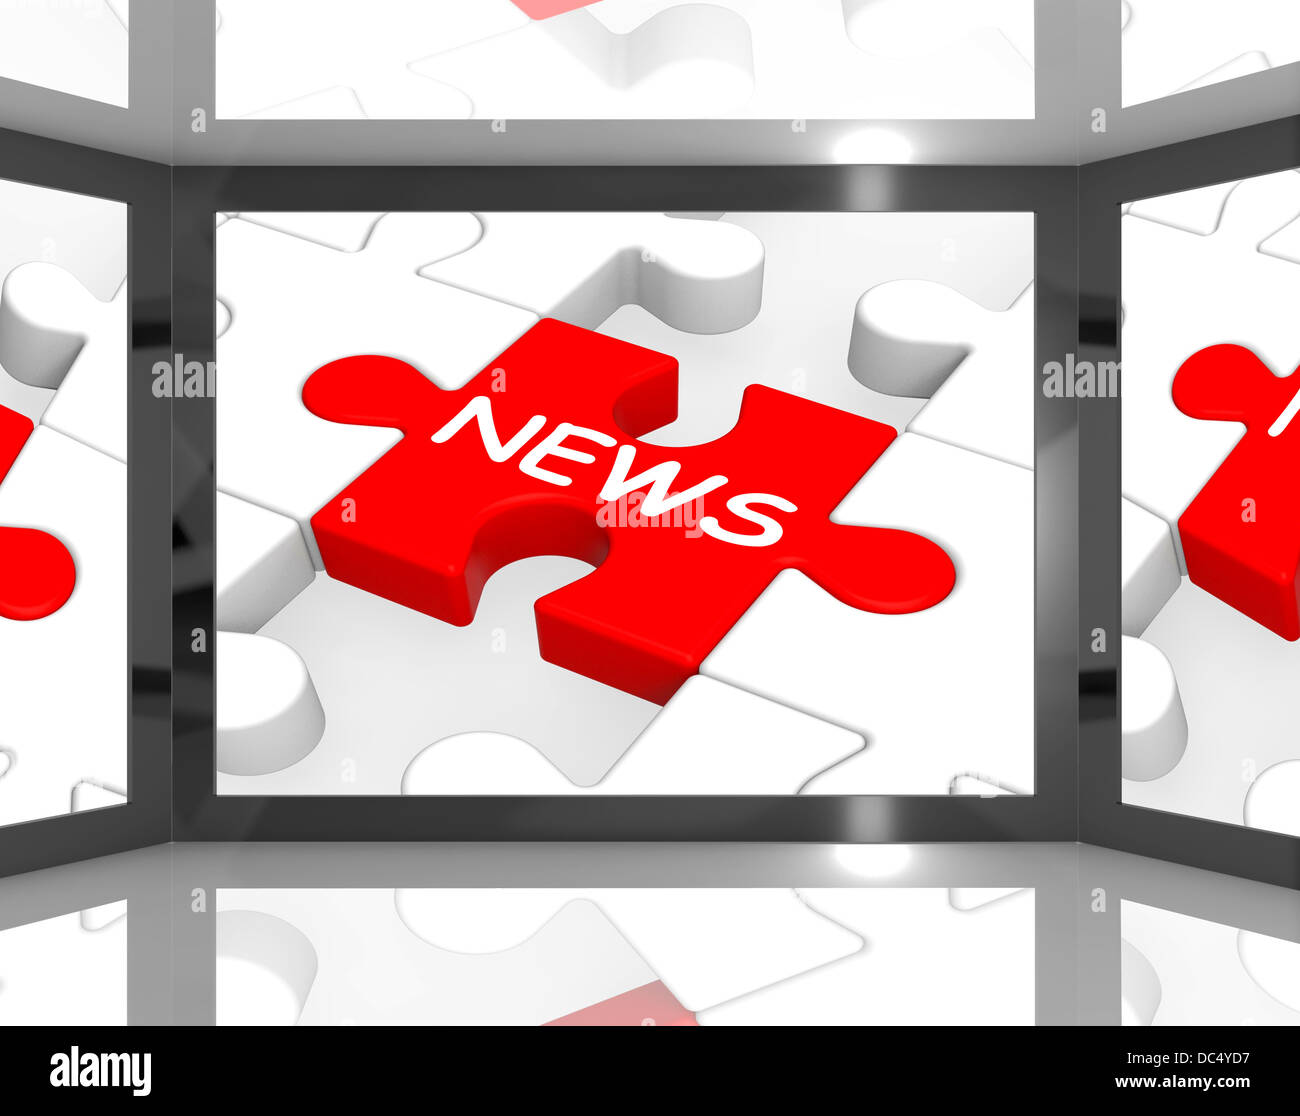 News On Screen Showing News Anchorman Stock Photo